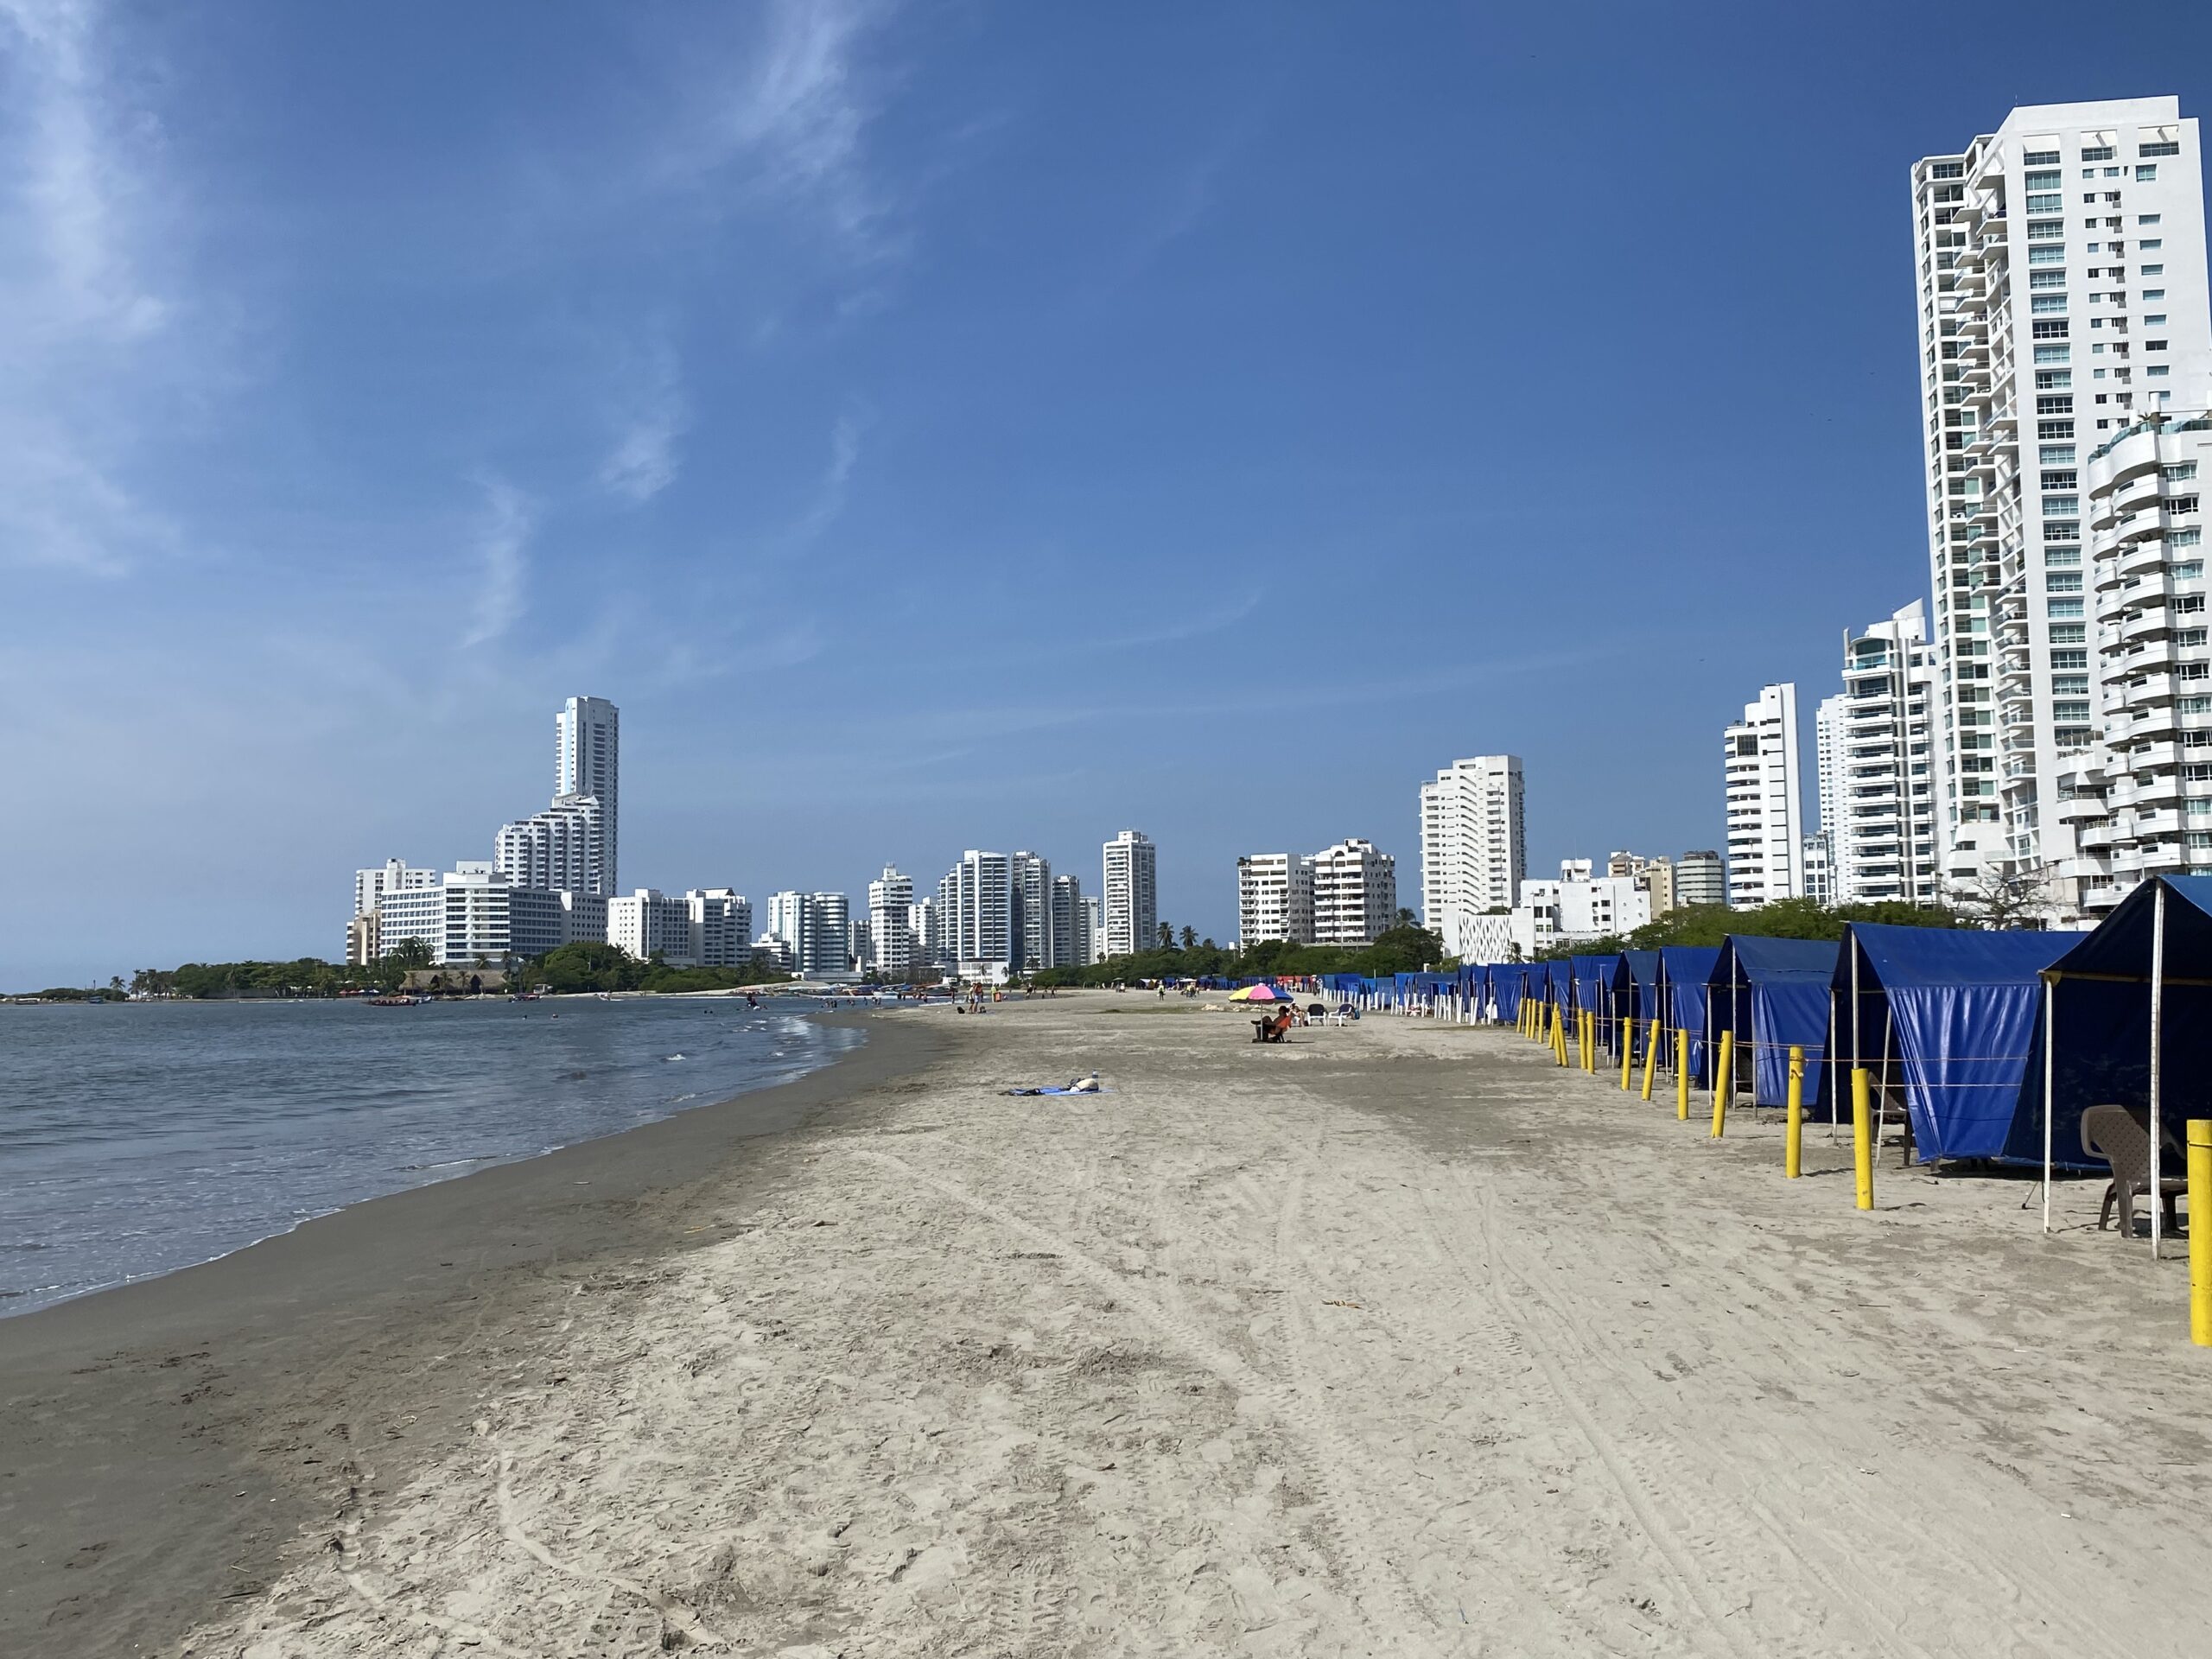 BEACHES IN THE CITY OF CARTAGENA